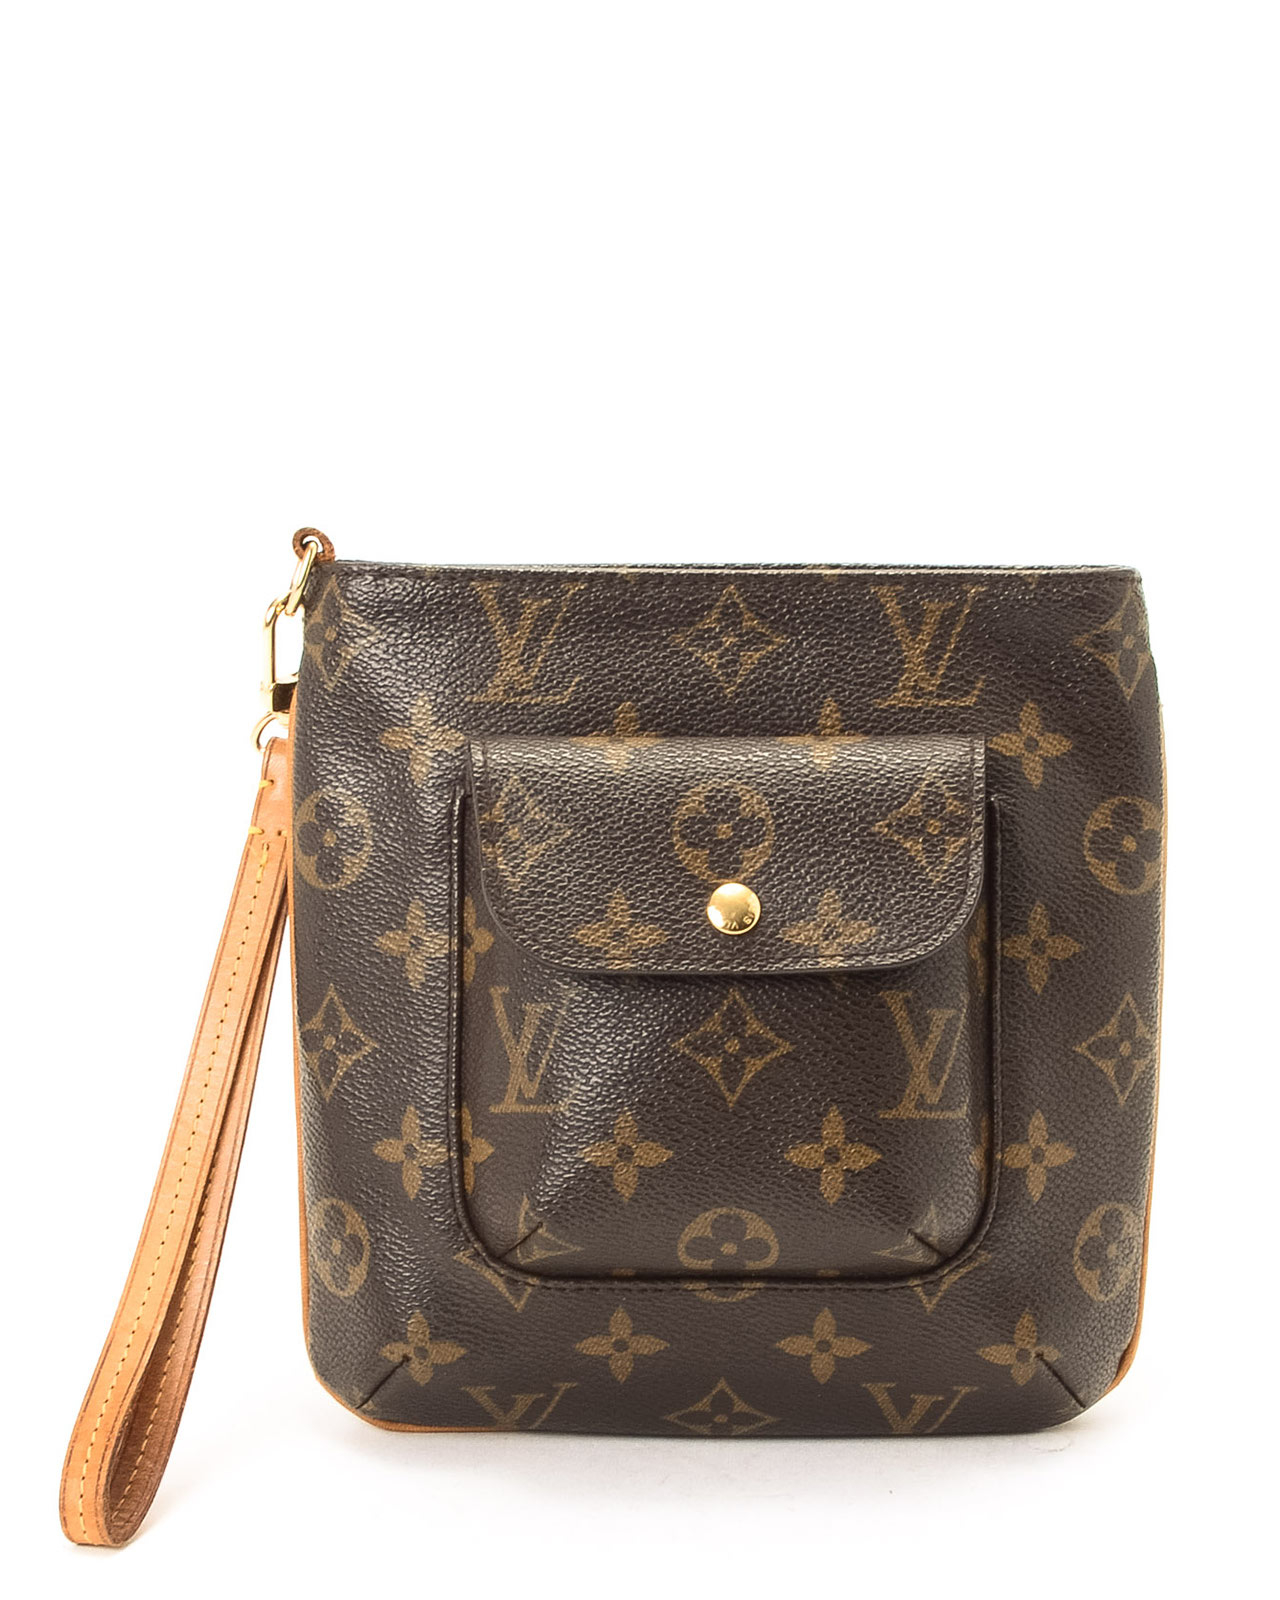 Louis Vuitton Strap For Wristlet | Confederated Tribes of the Umatilla Indian Reservation